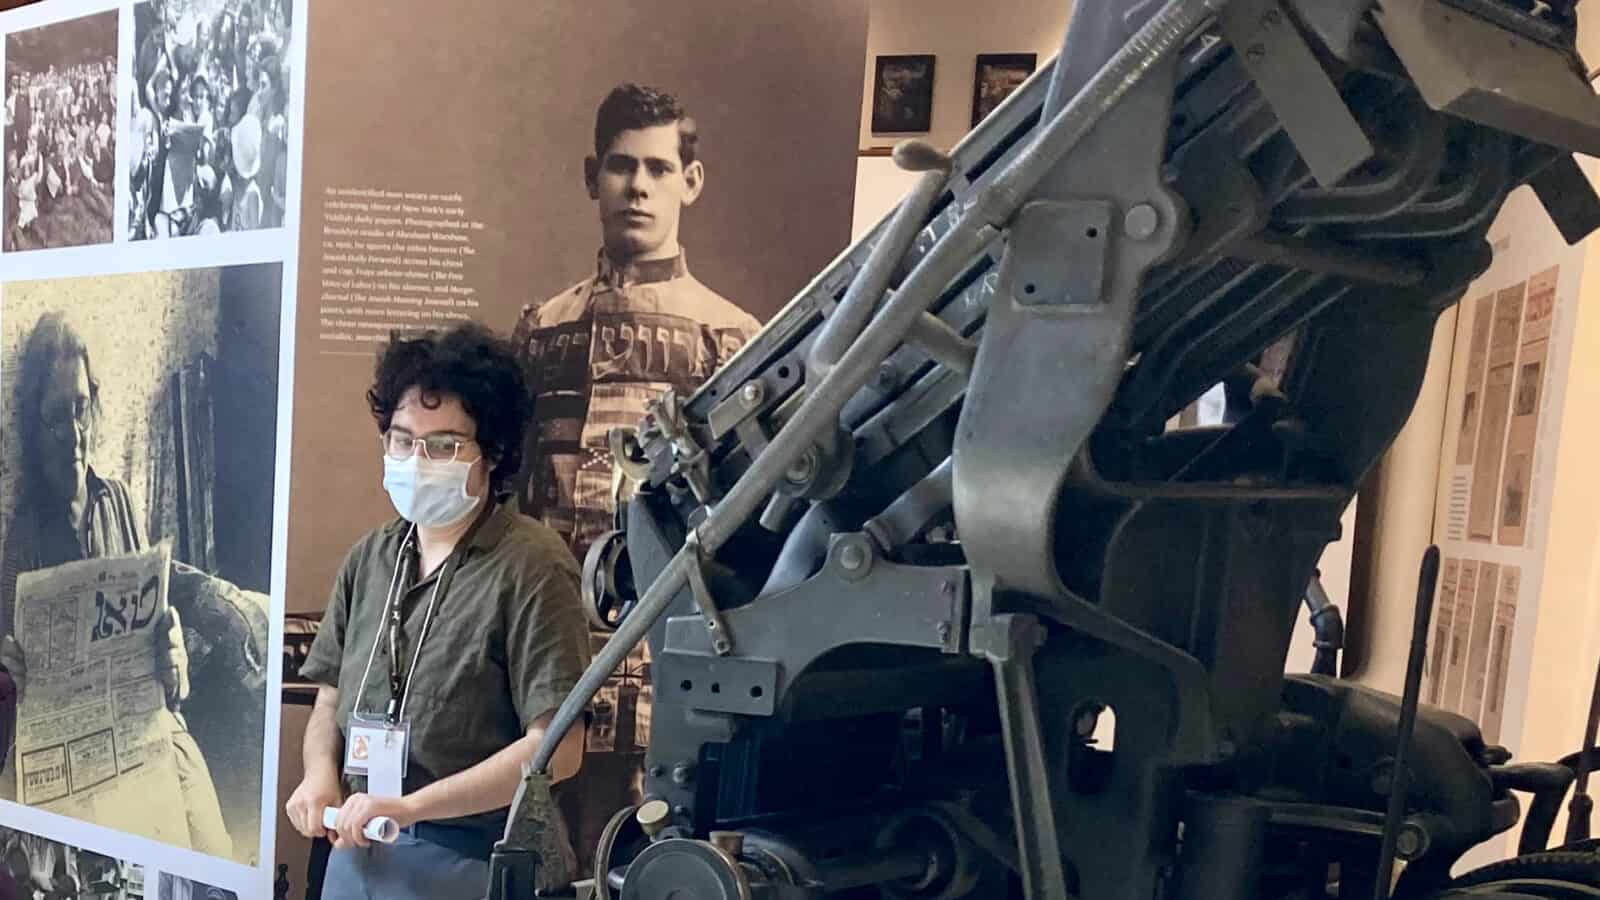 A visitor looks at the last Yiddish linotype machine, on view at the opening of A Global Culture. Press photo courtesy of the Yiddish Book Center in Amherst.